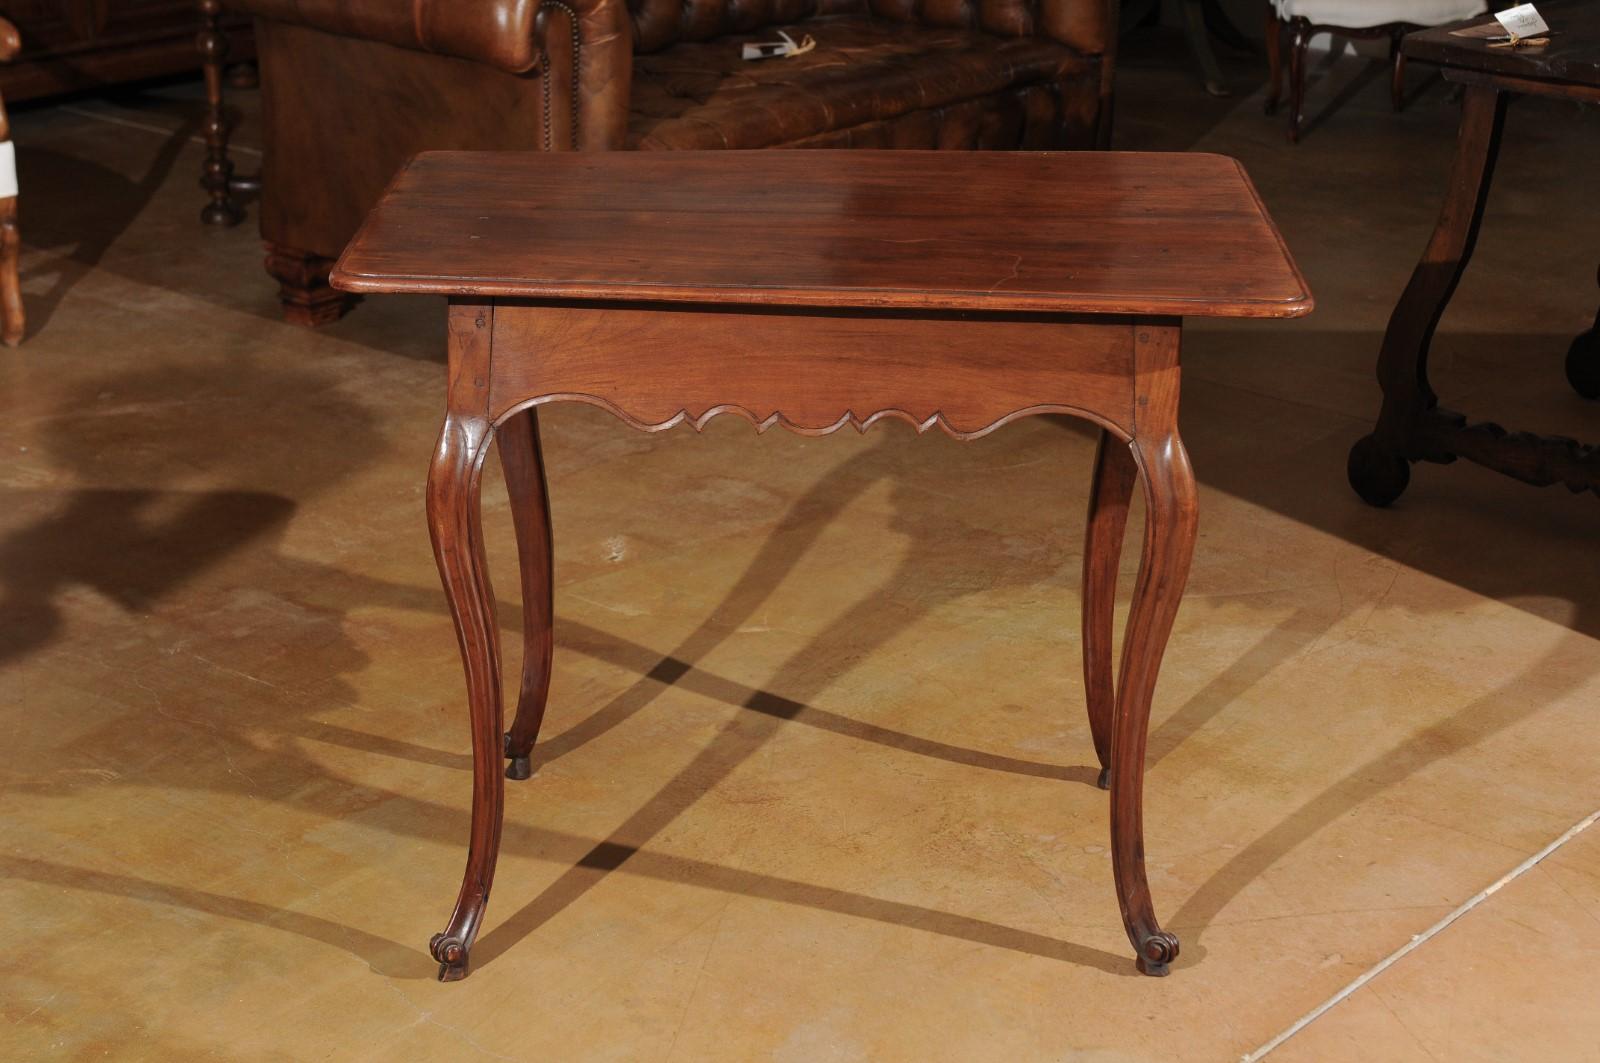 French Louis XV 1780s Solid Walnut Side Table with Drawer and Fretted Motifs (Louis XV.)